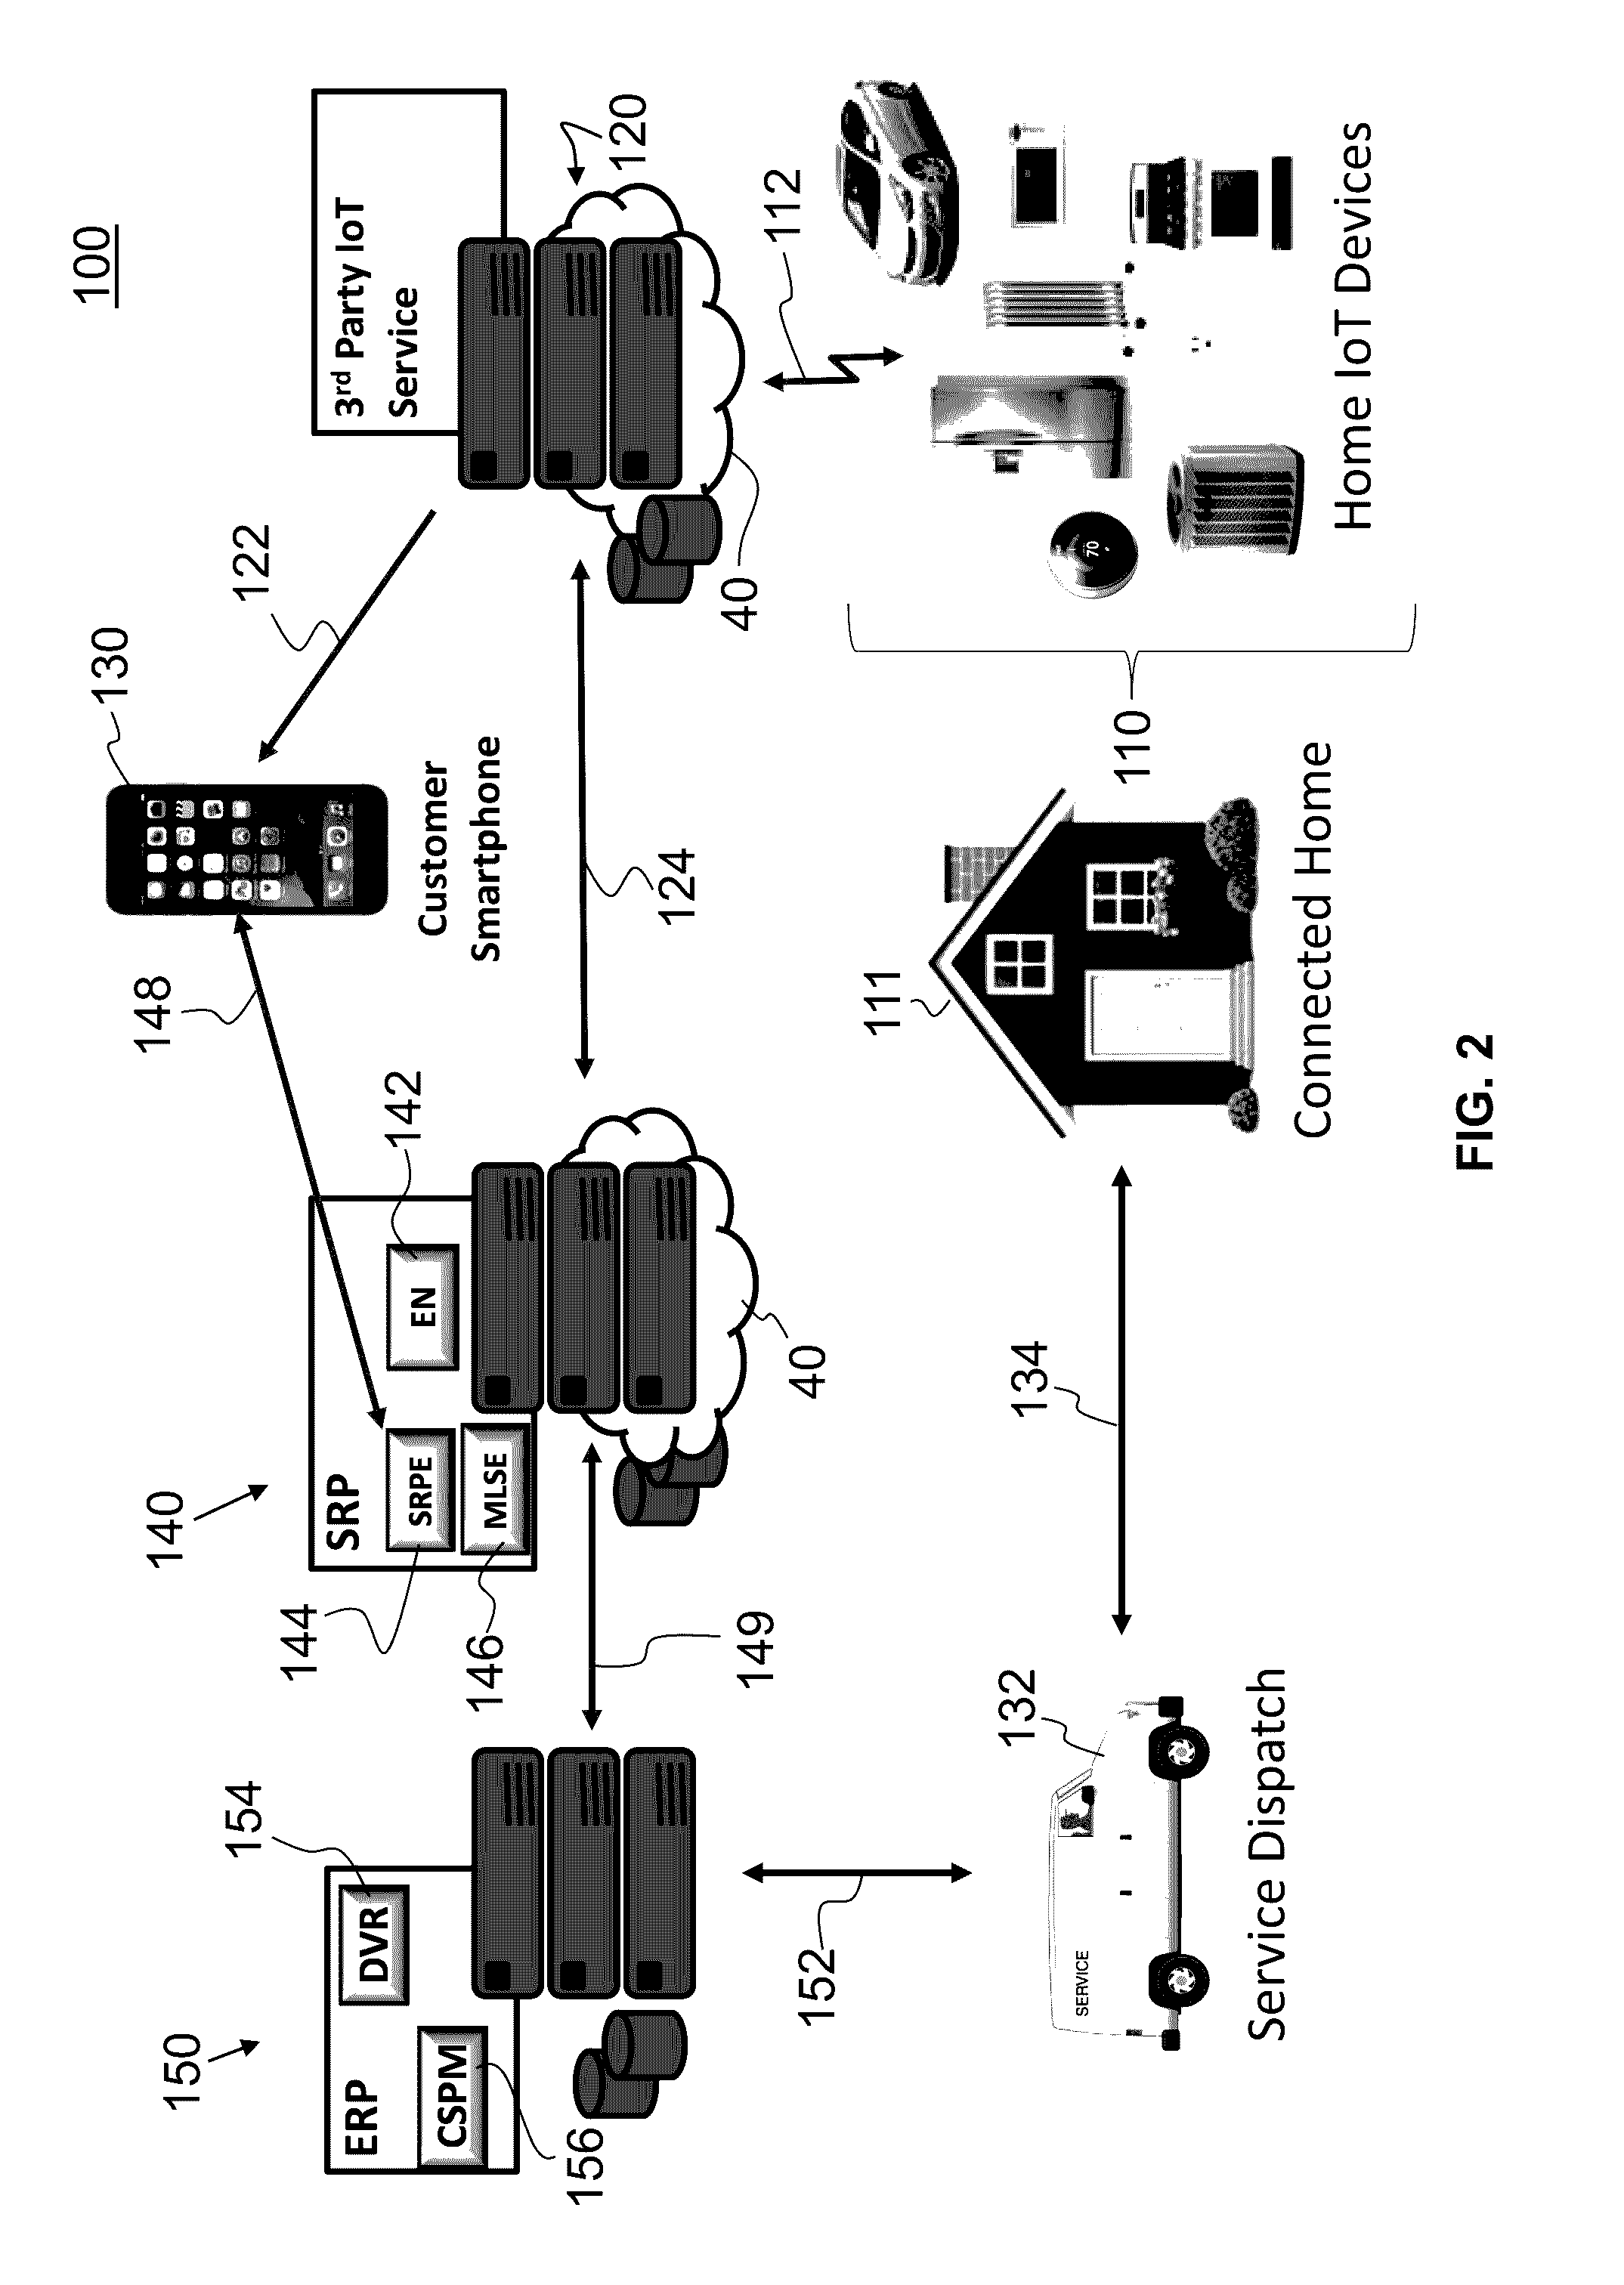 Systems and methods for efficiently handling appliance warranty service events